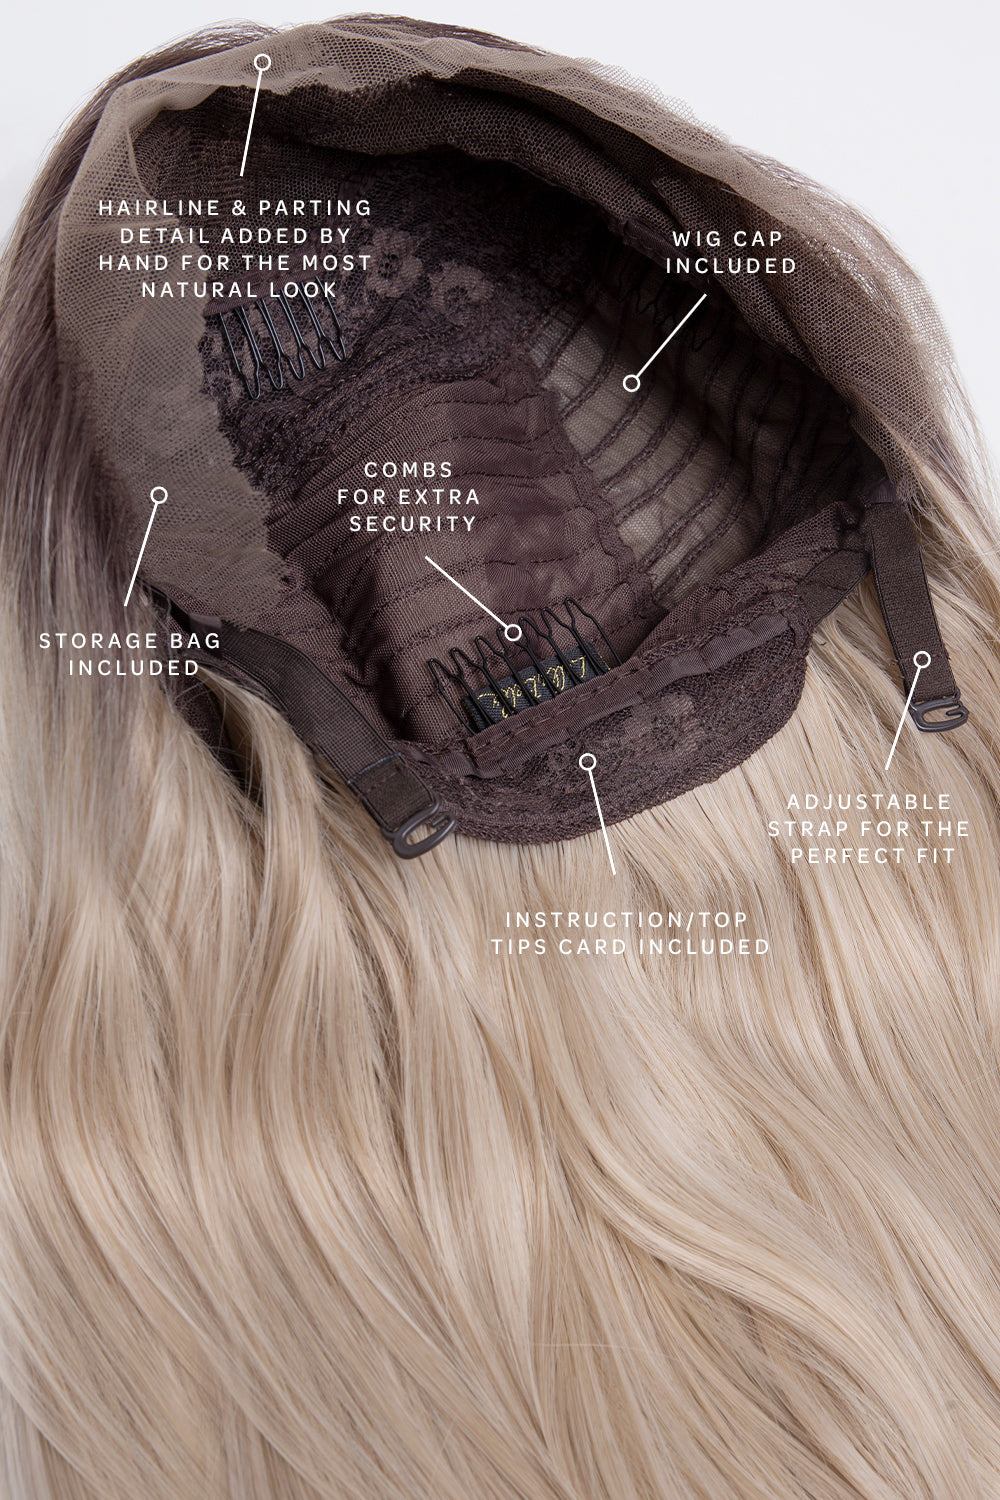 The Cali - Ash Blonde Straight Lob Lace Front Wig